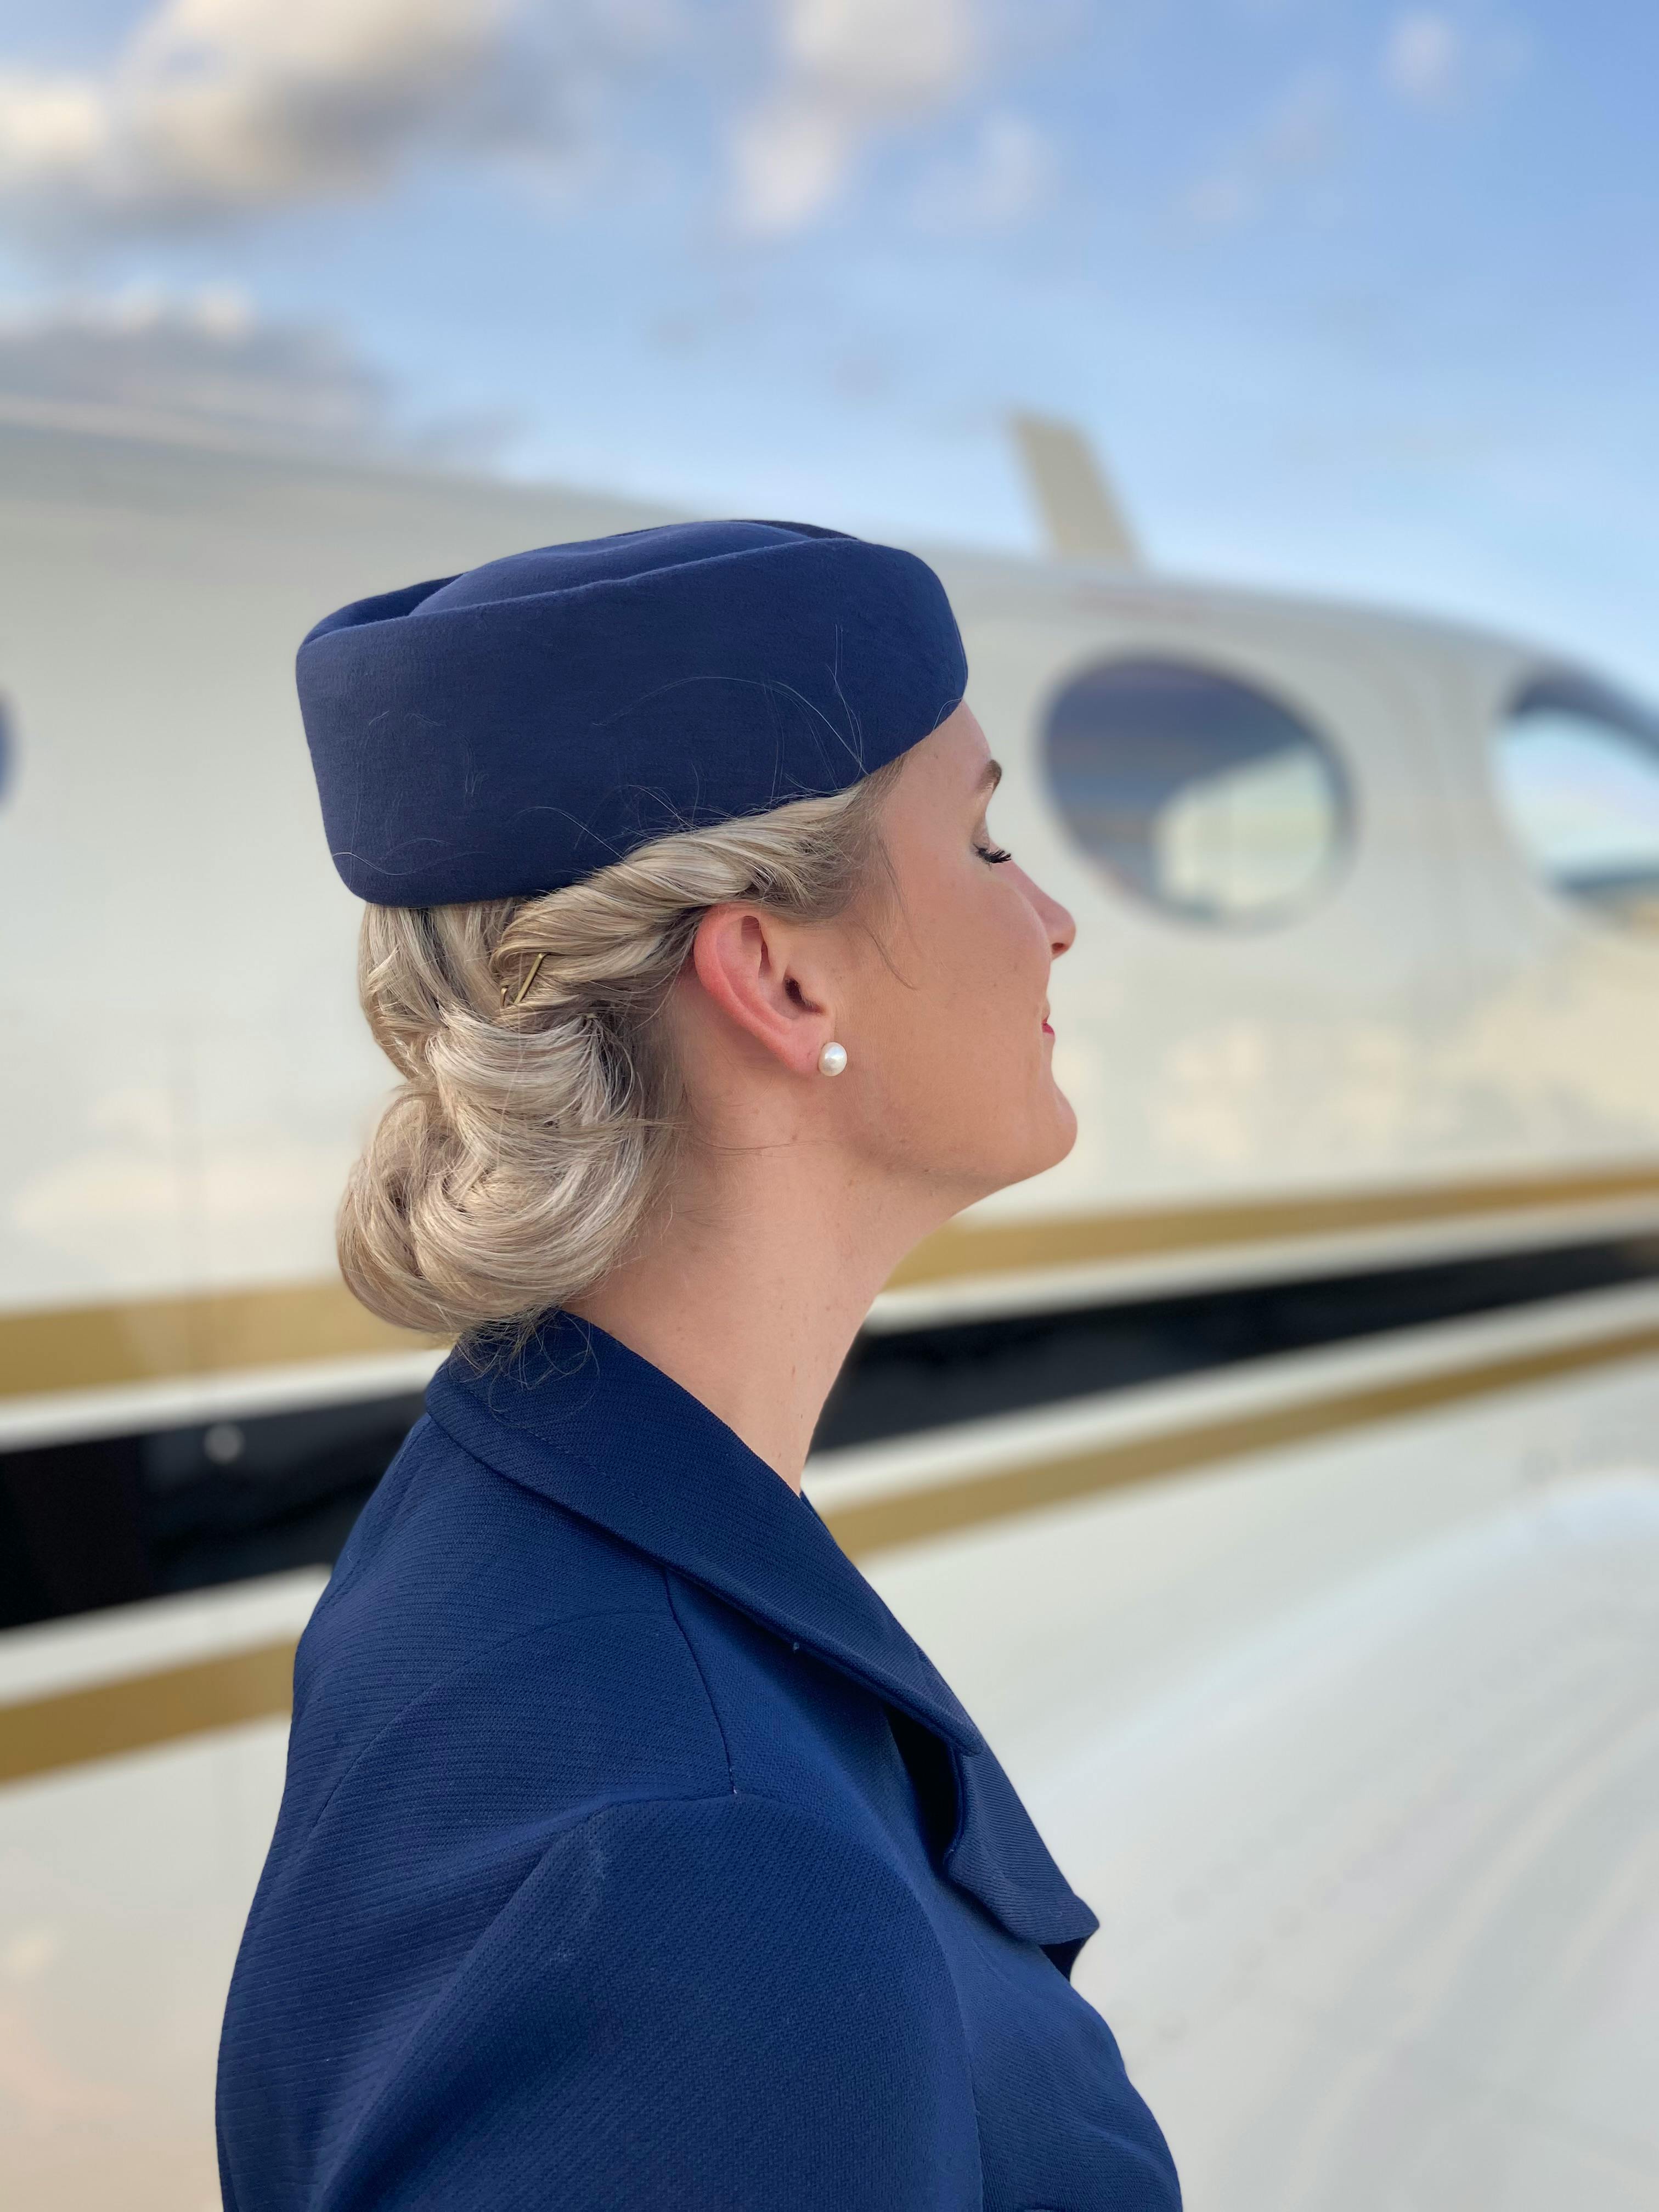 A happy flight attendant standing next to a plane | Source: Pexels